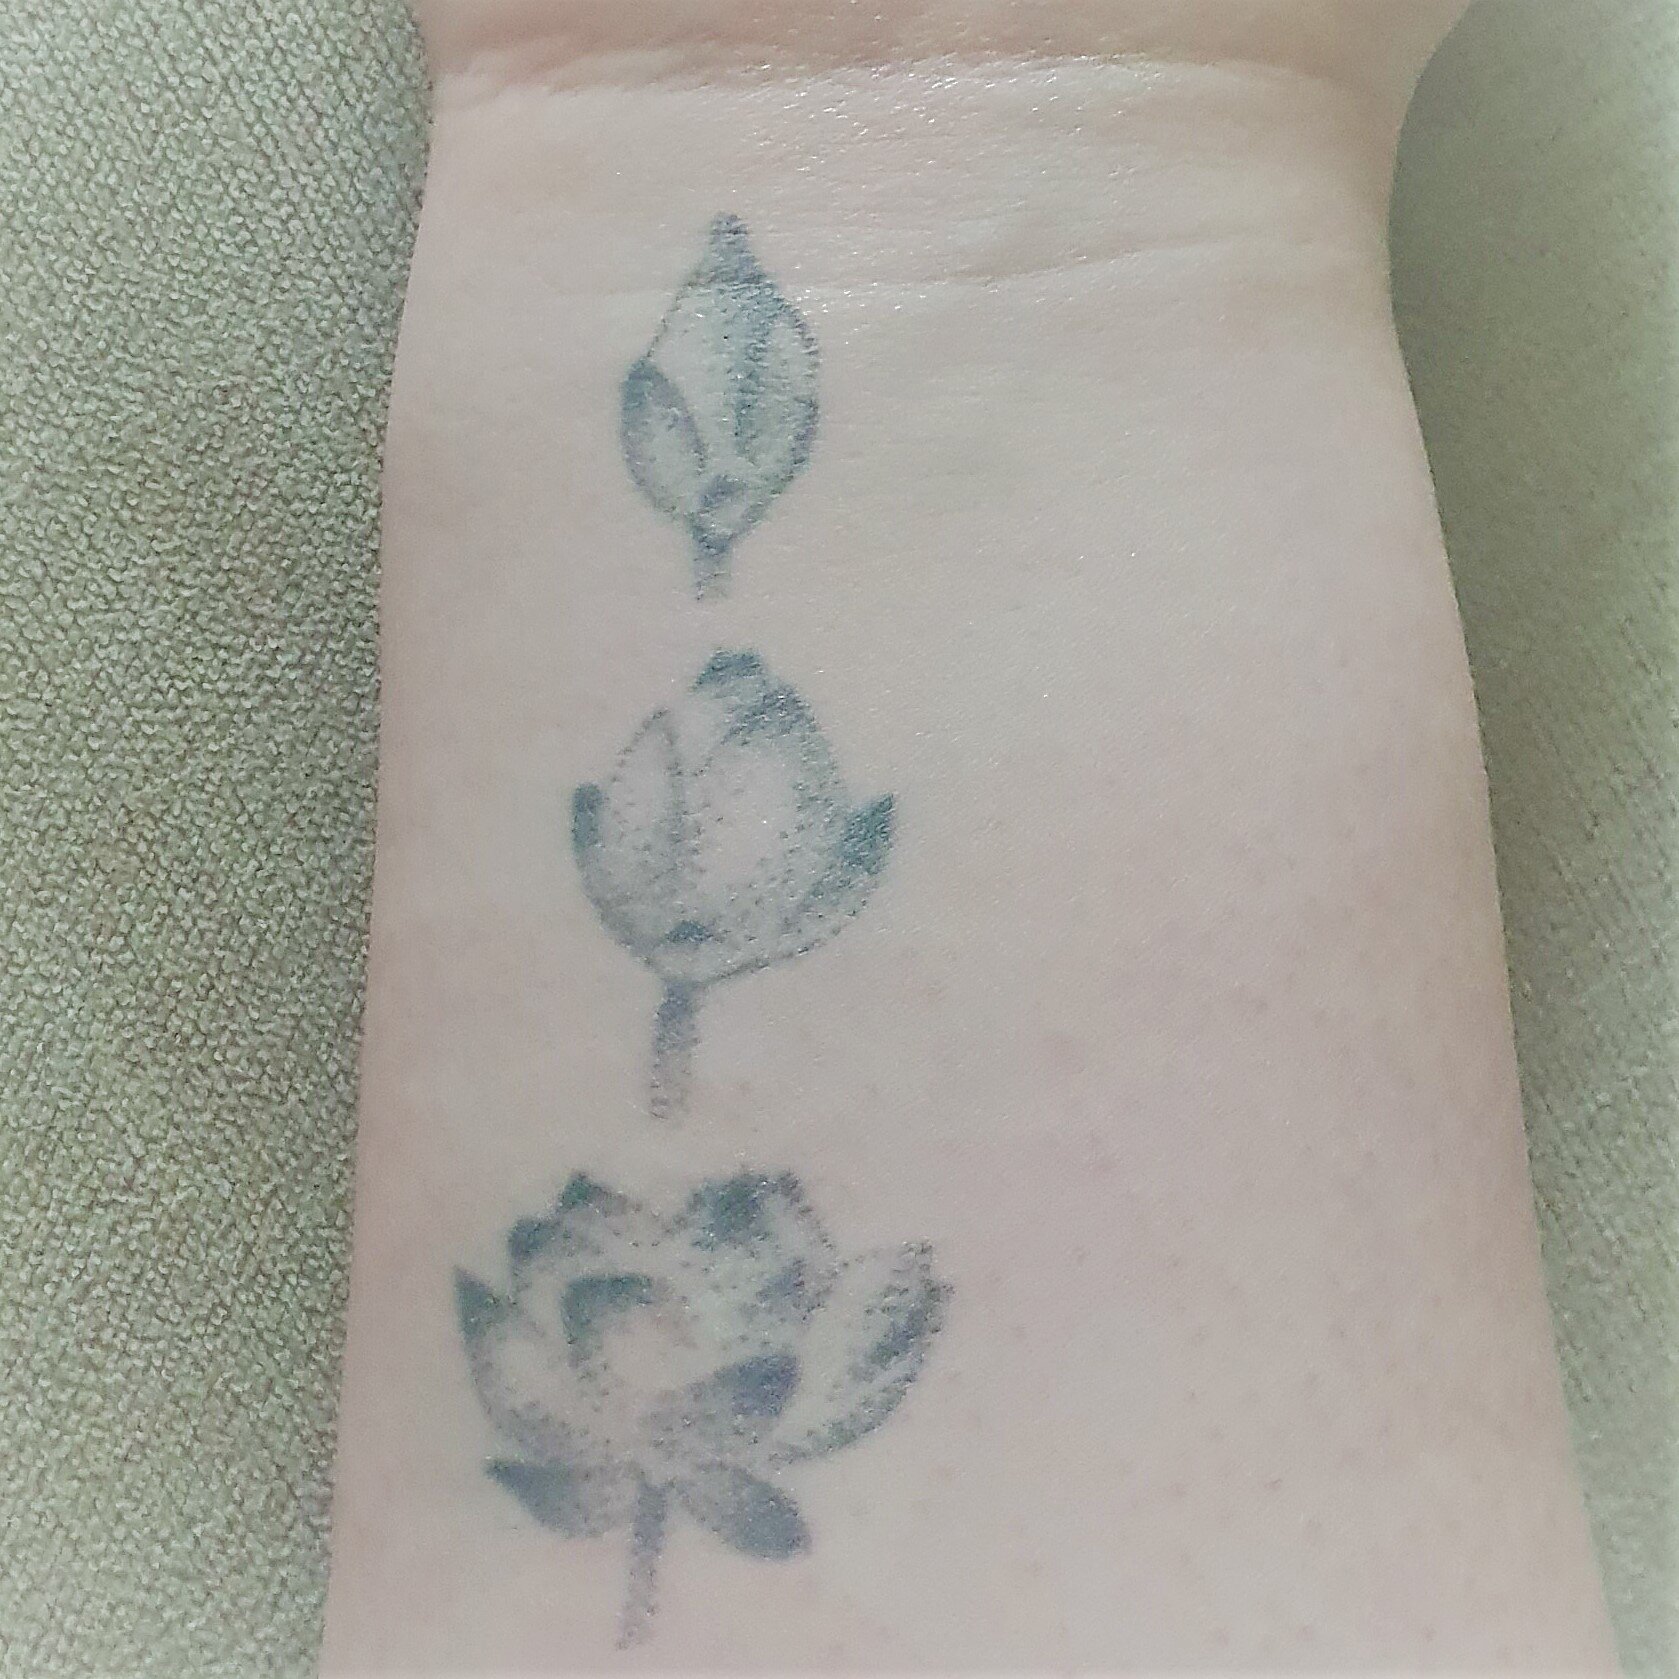 Before You Tattoo Over Your Self Harm Scars — Stabilising Serotonin